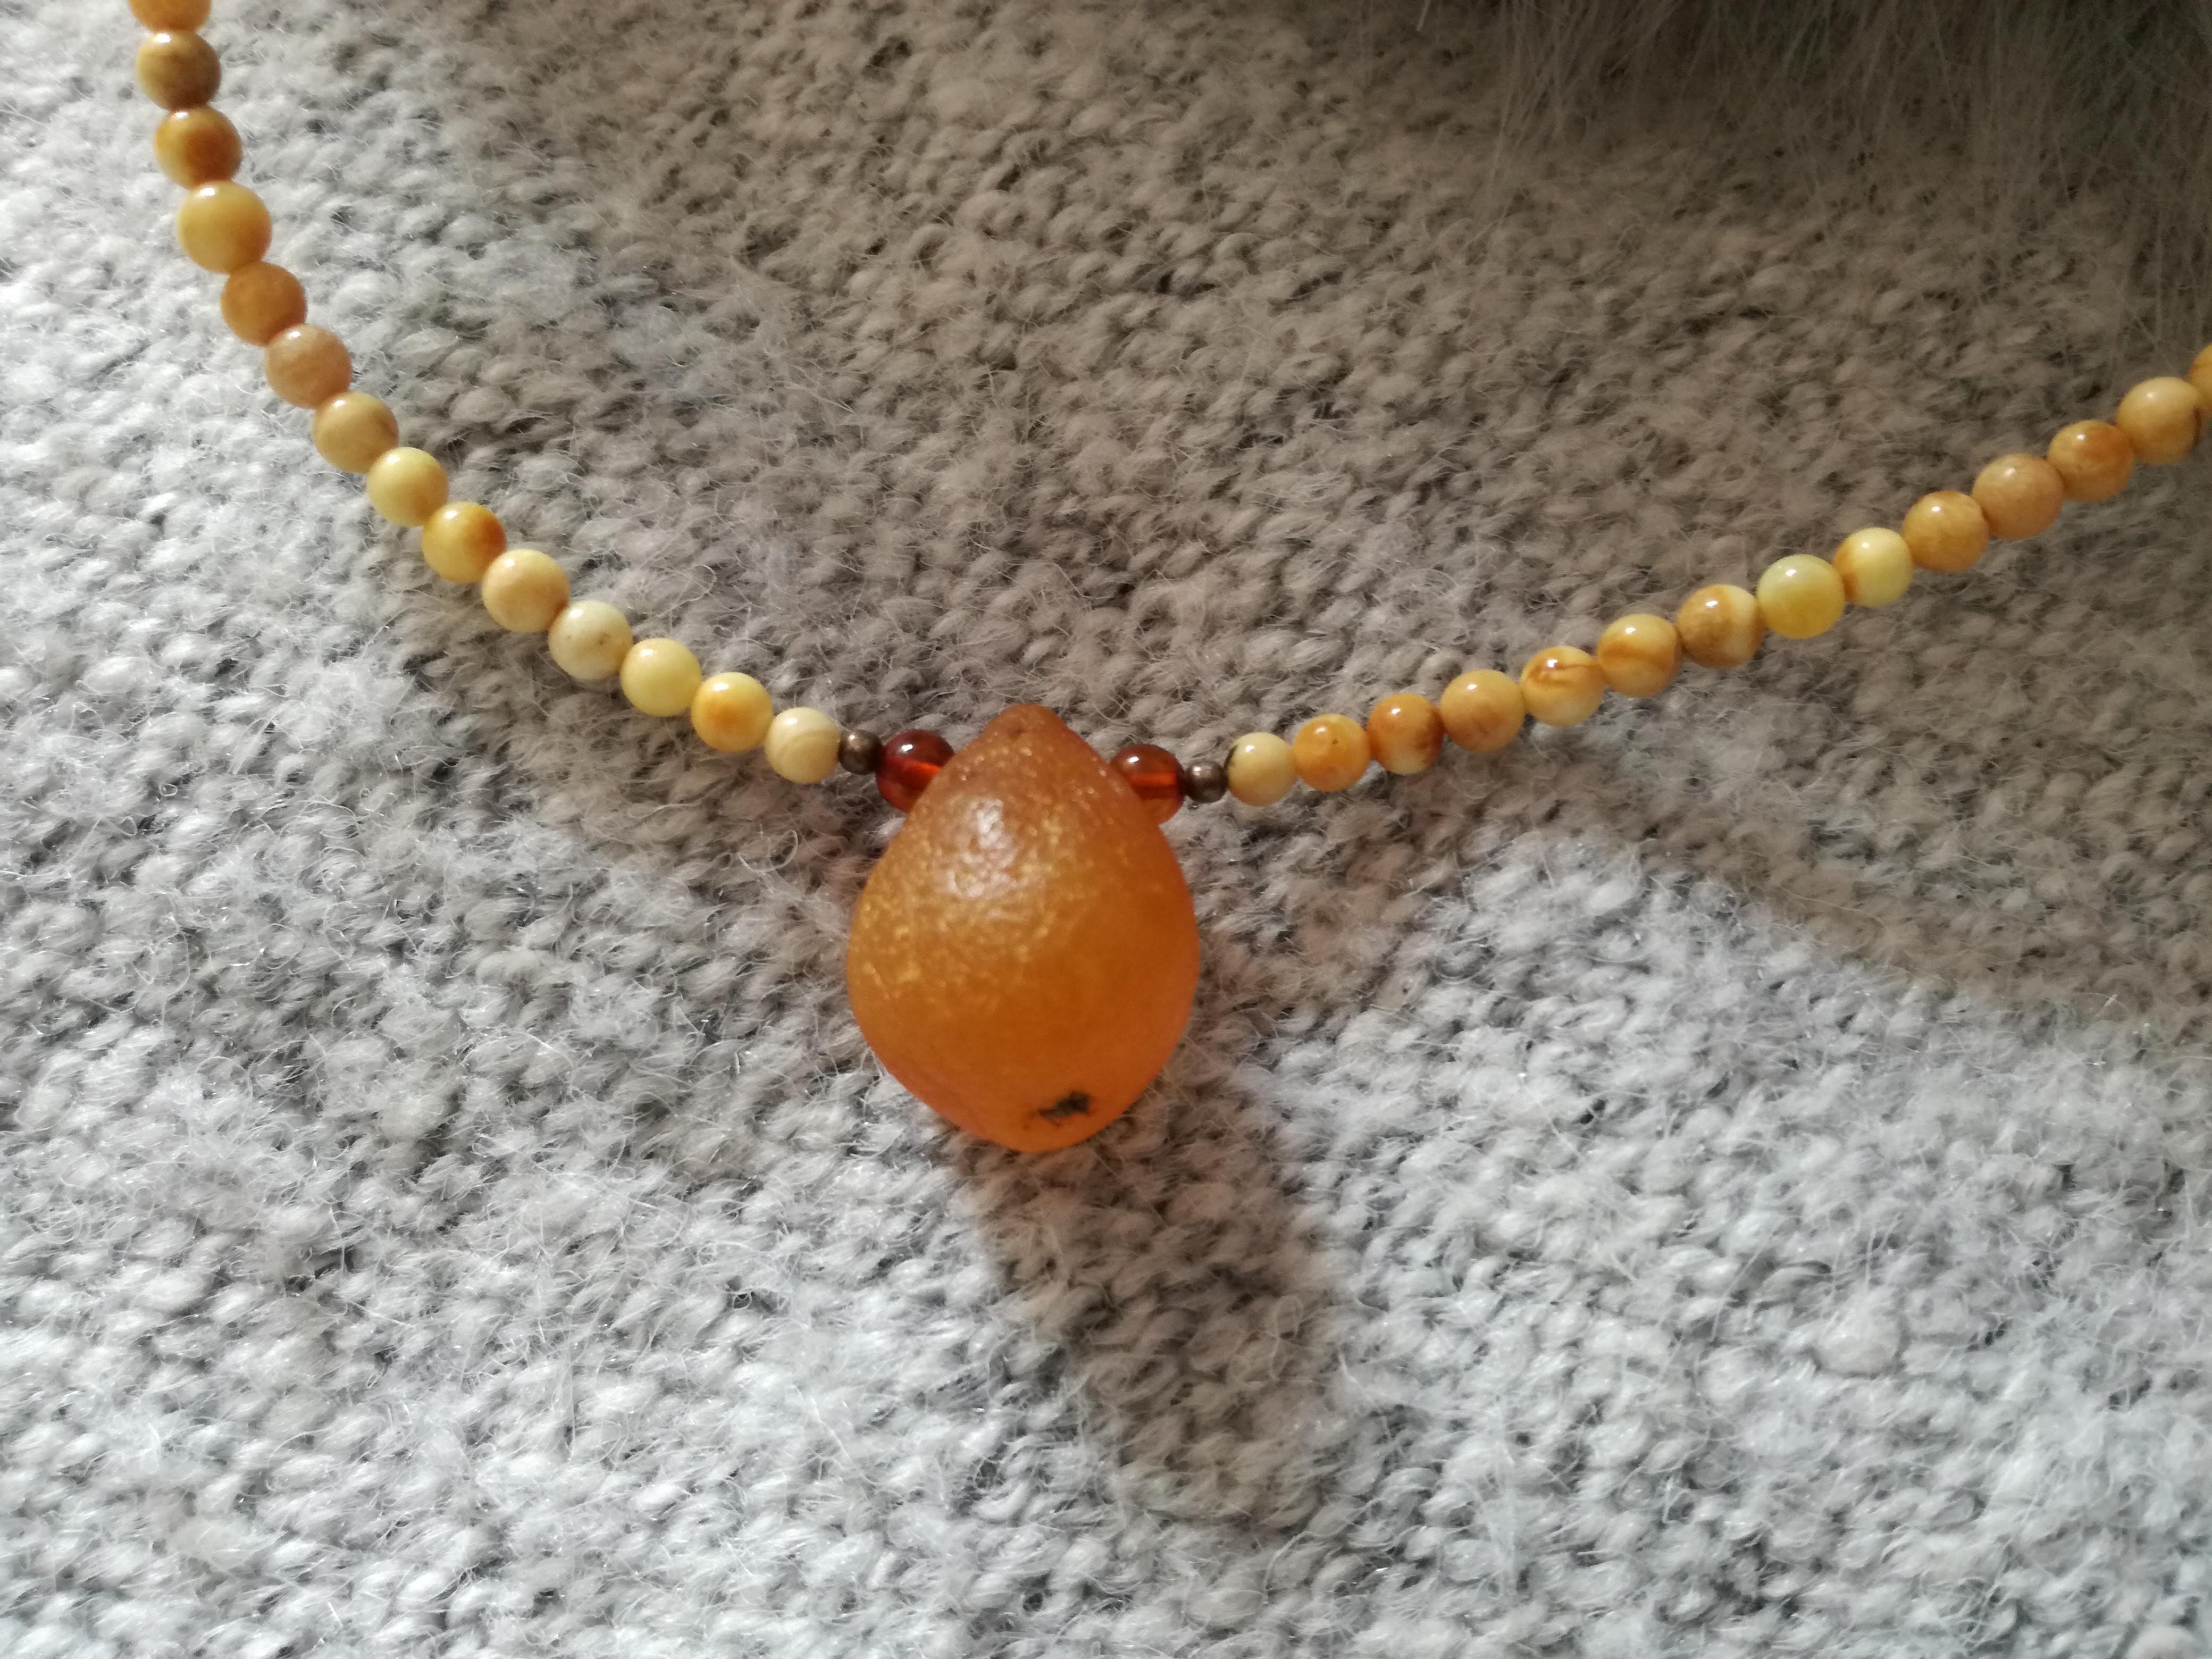 Genuine Handmade Baltic Amber Necklace for Adults, small polished milky beads + one cognac amber nugget, Healing properties, Nursing Mums, Gift for Women